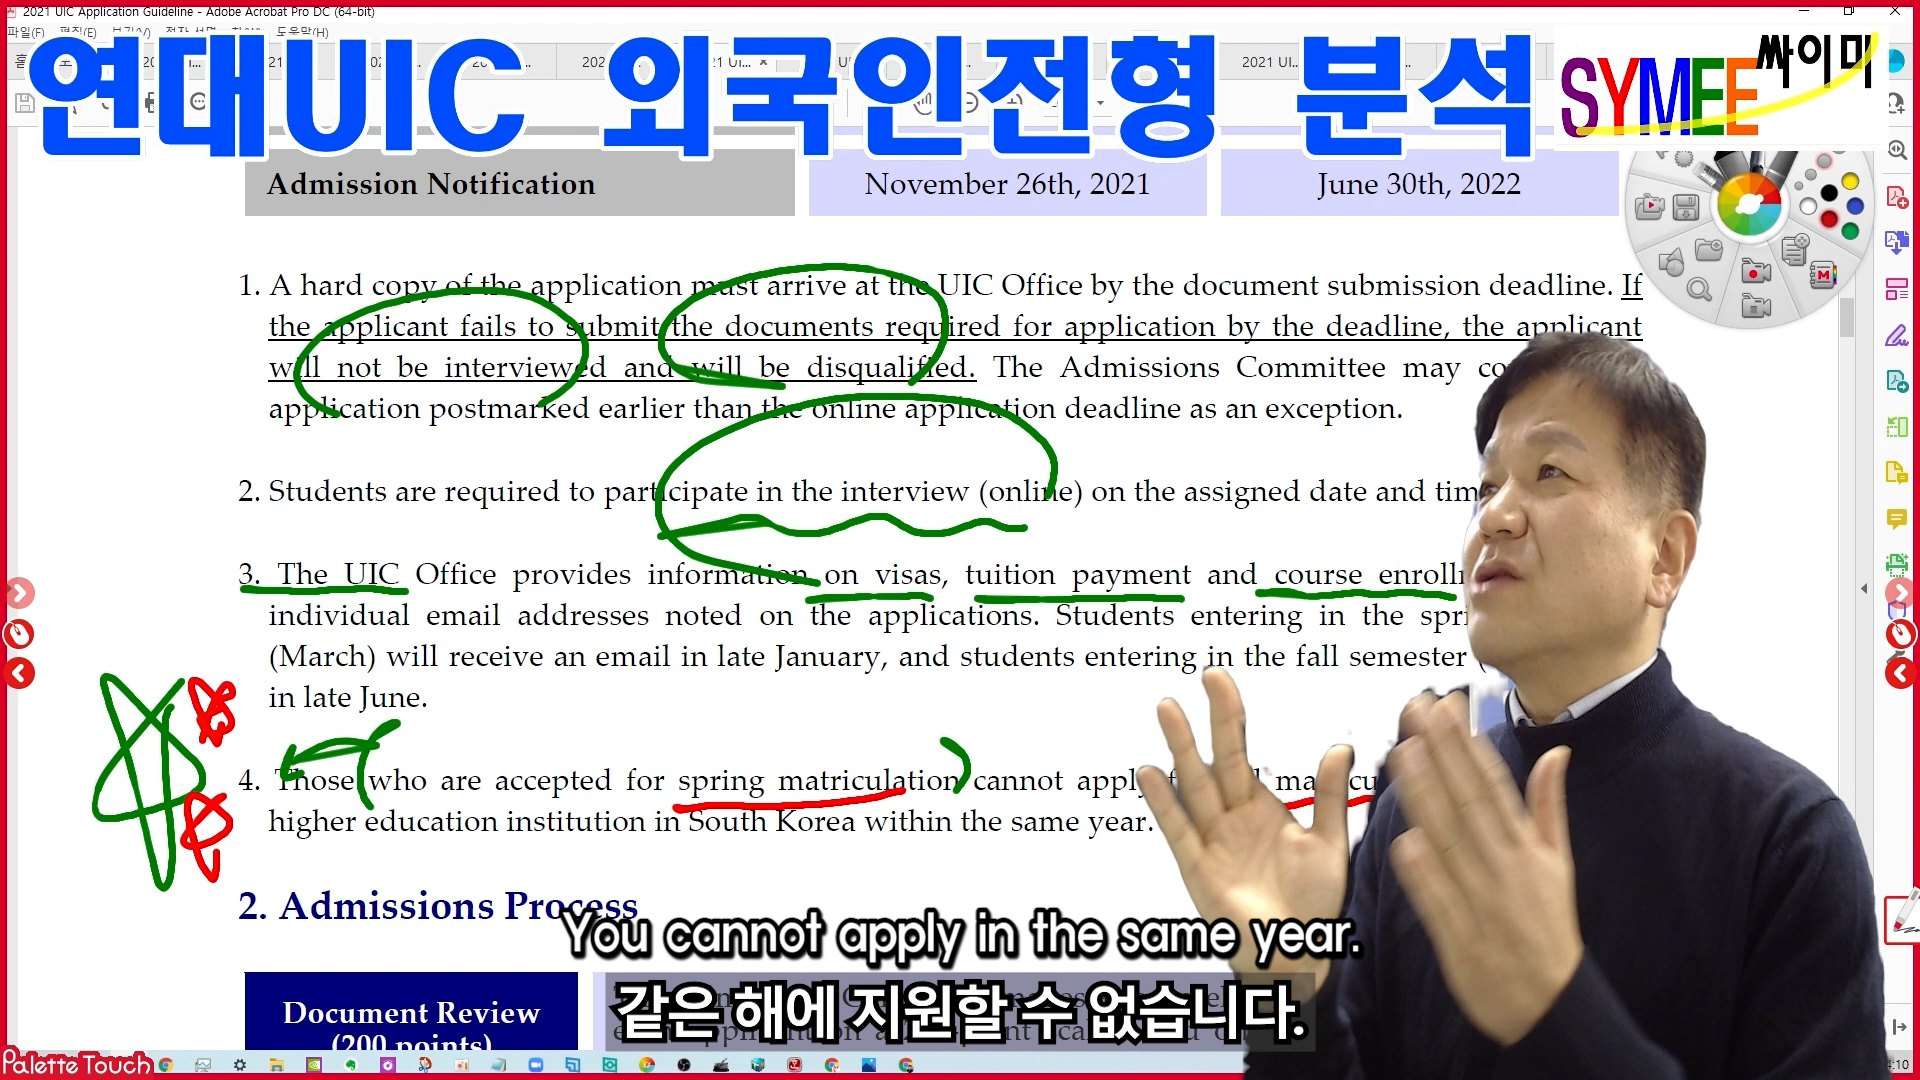 Yonsei Univ. Admission for UIC for Foreign Student 03 Admission Procedure.00_03_18_04.스틸 006.jpg